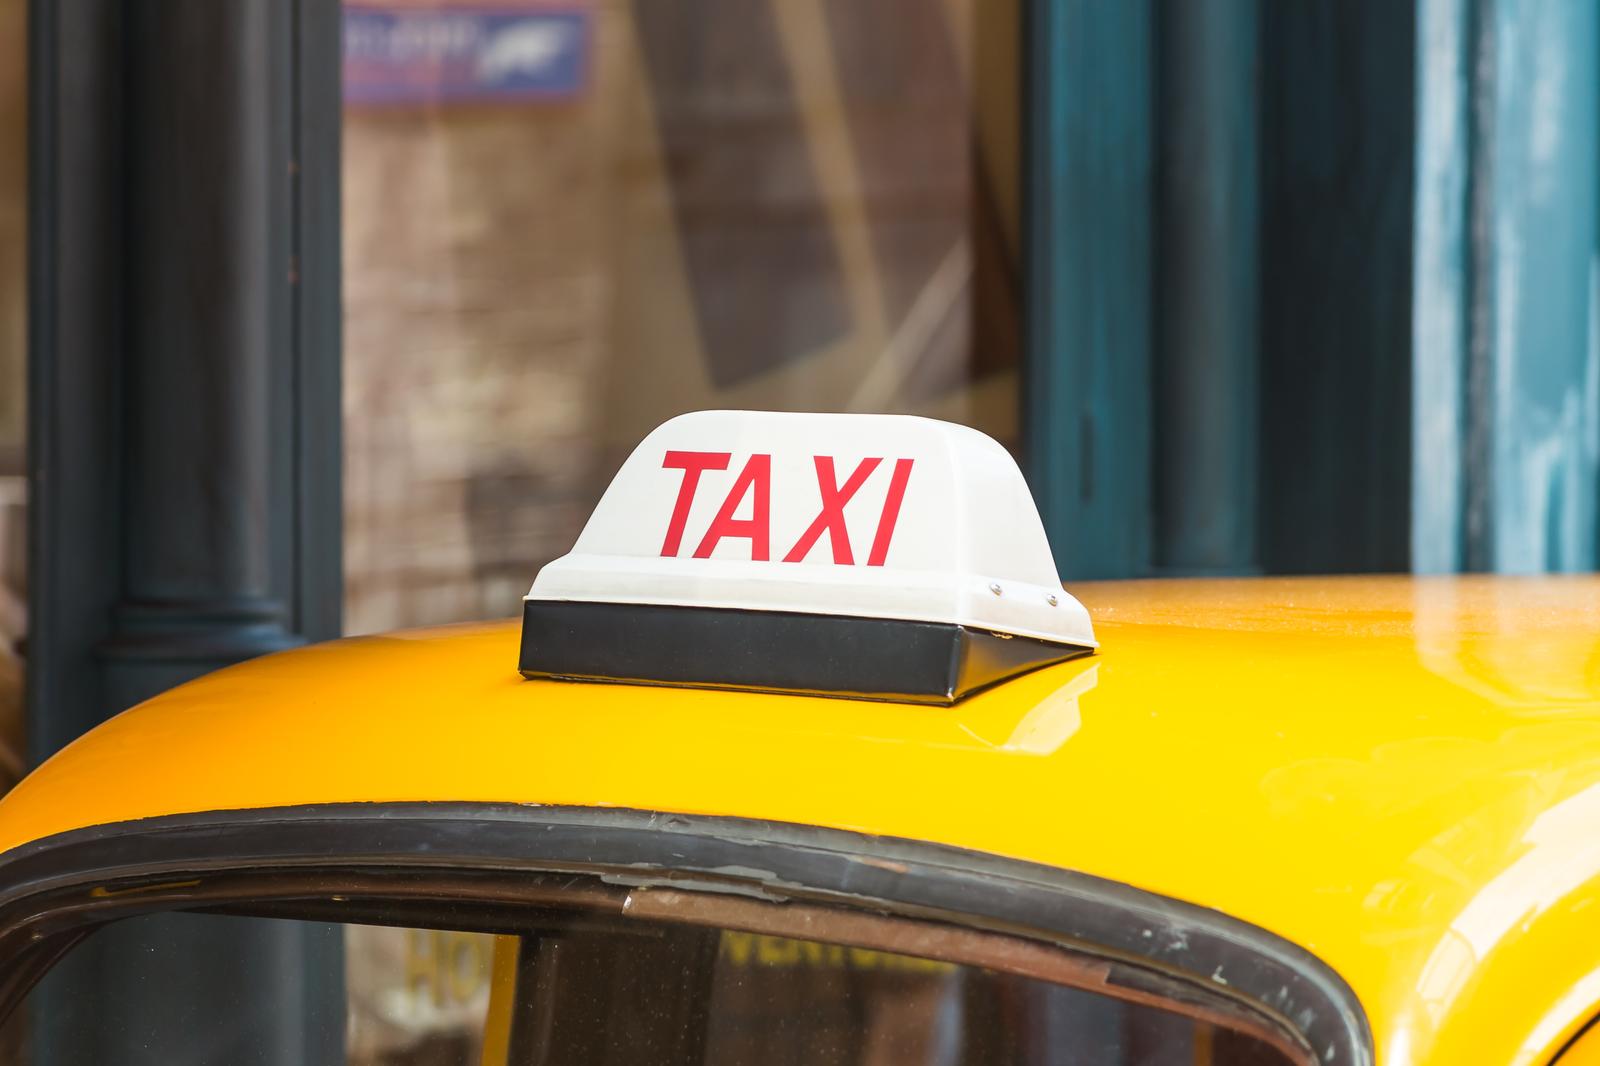 TAKSOPLEX OÜ - Taxi transport and other related services, products, consultations